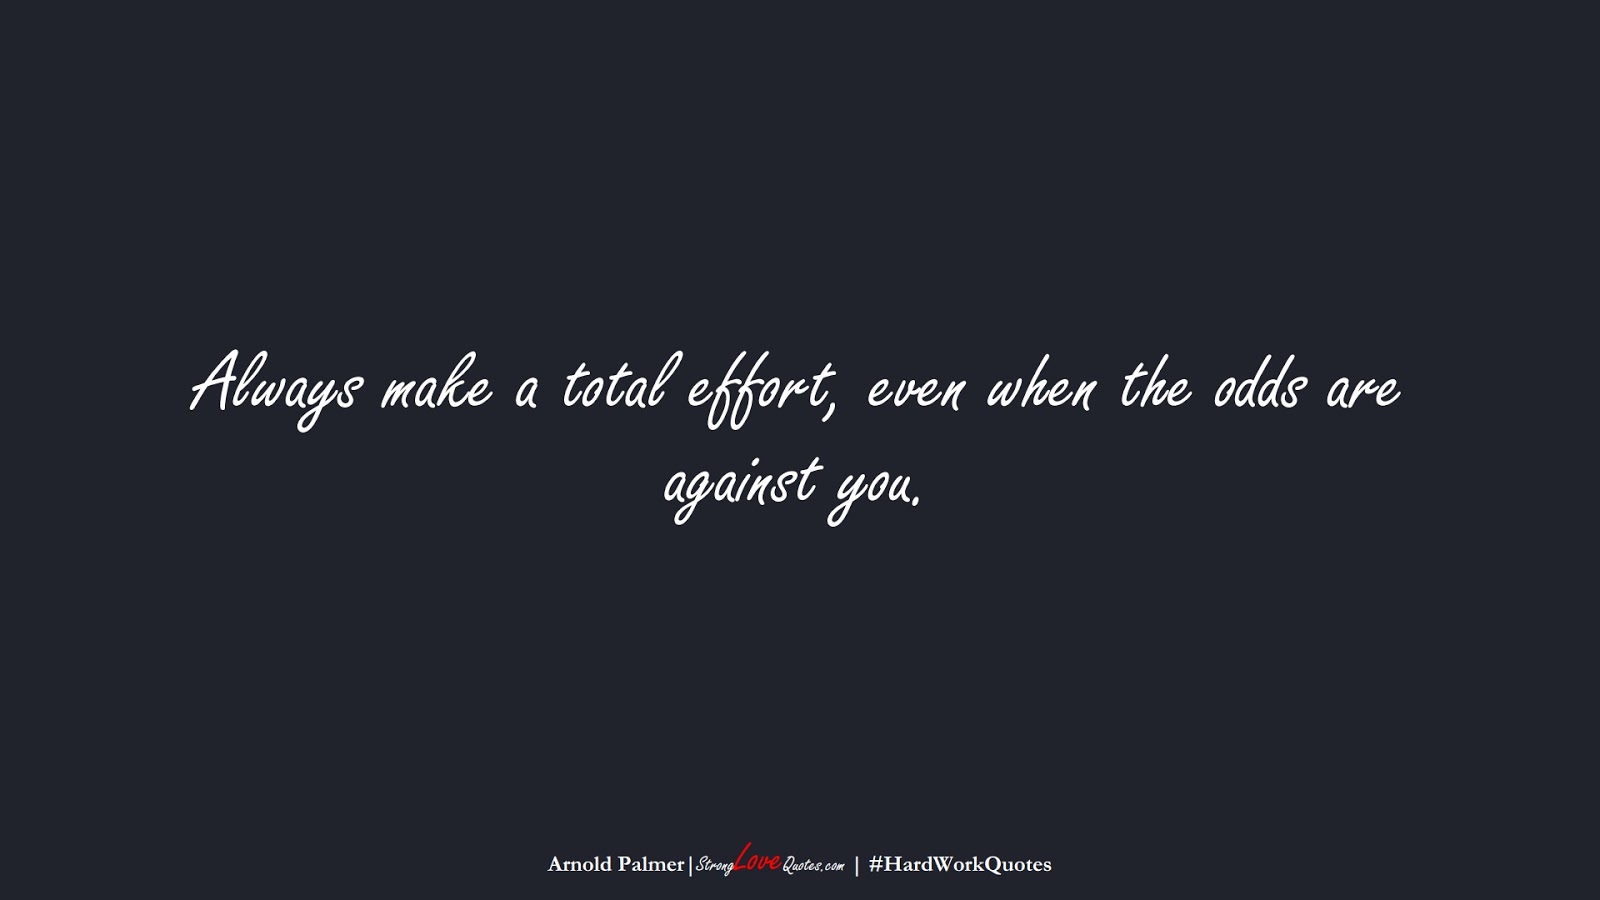 Always make a total effort, even when the odds are against you. (Arnold Palmer);  #HardWorkQuotes